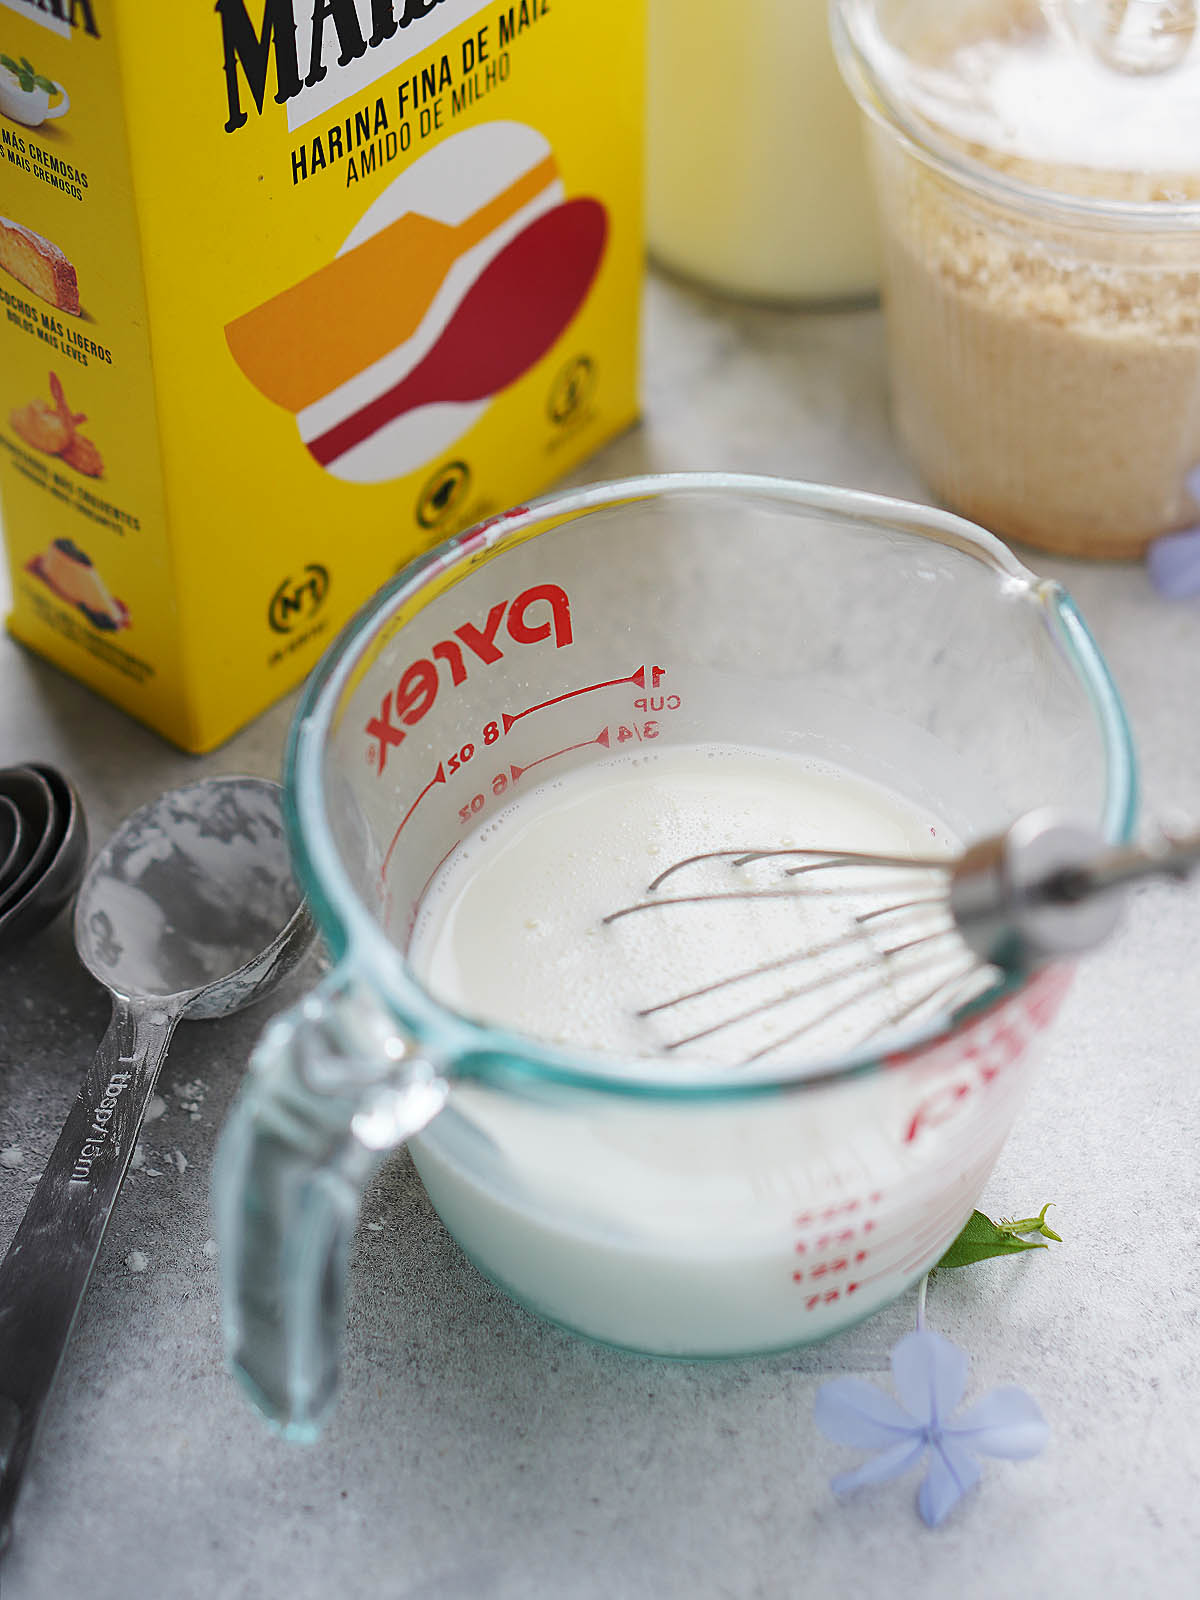 Mixing cornstarch with milk in a measuring cup, a box of Maizena in the background.